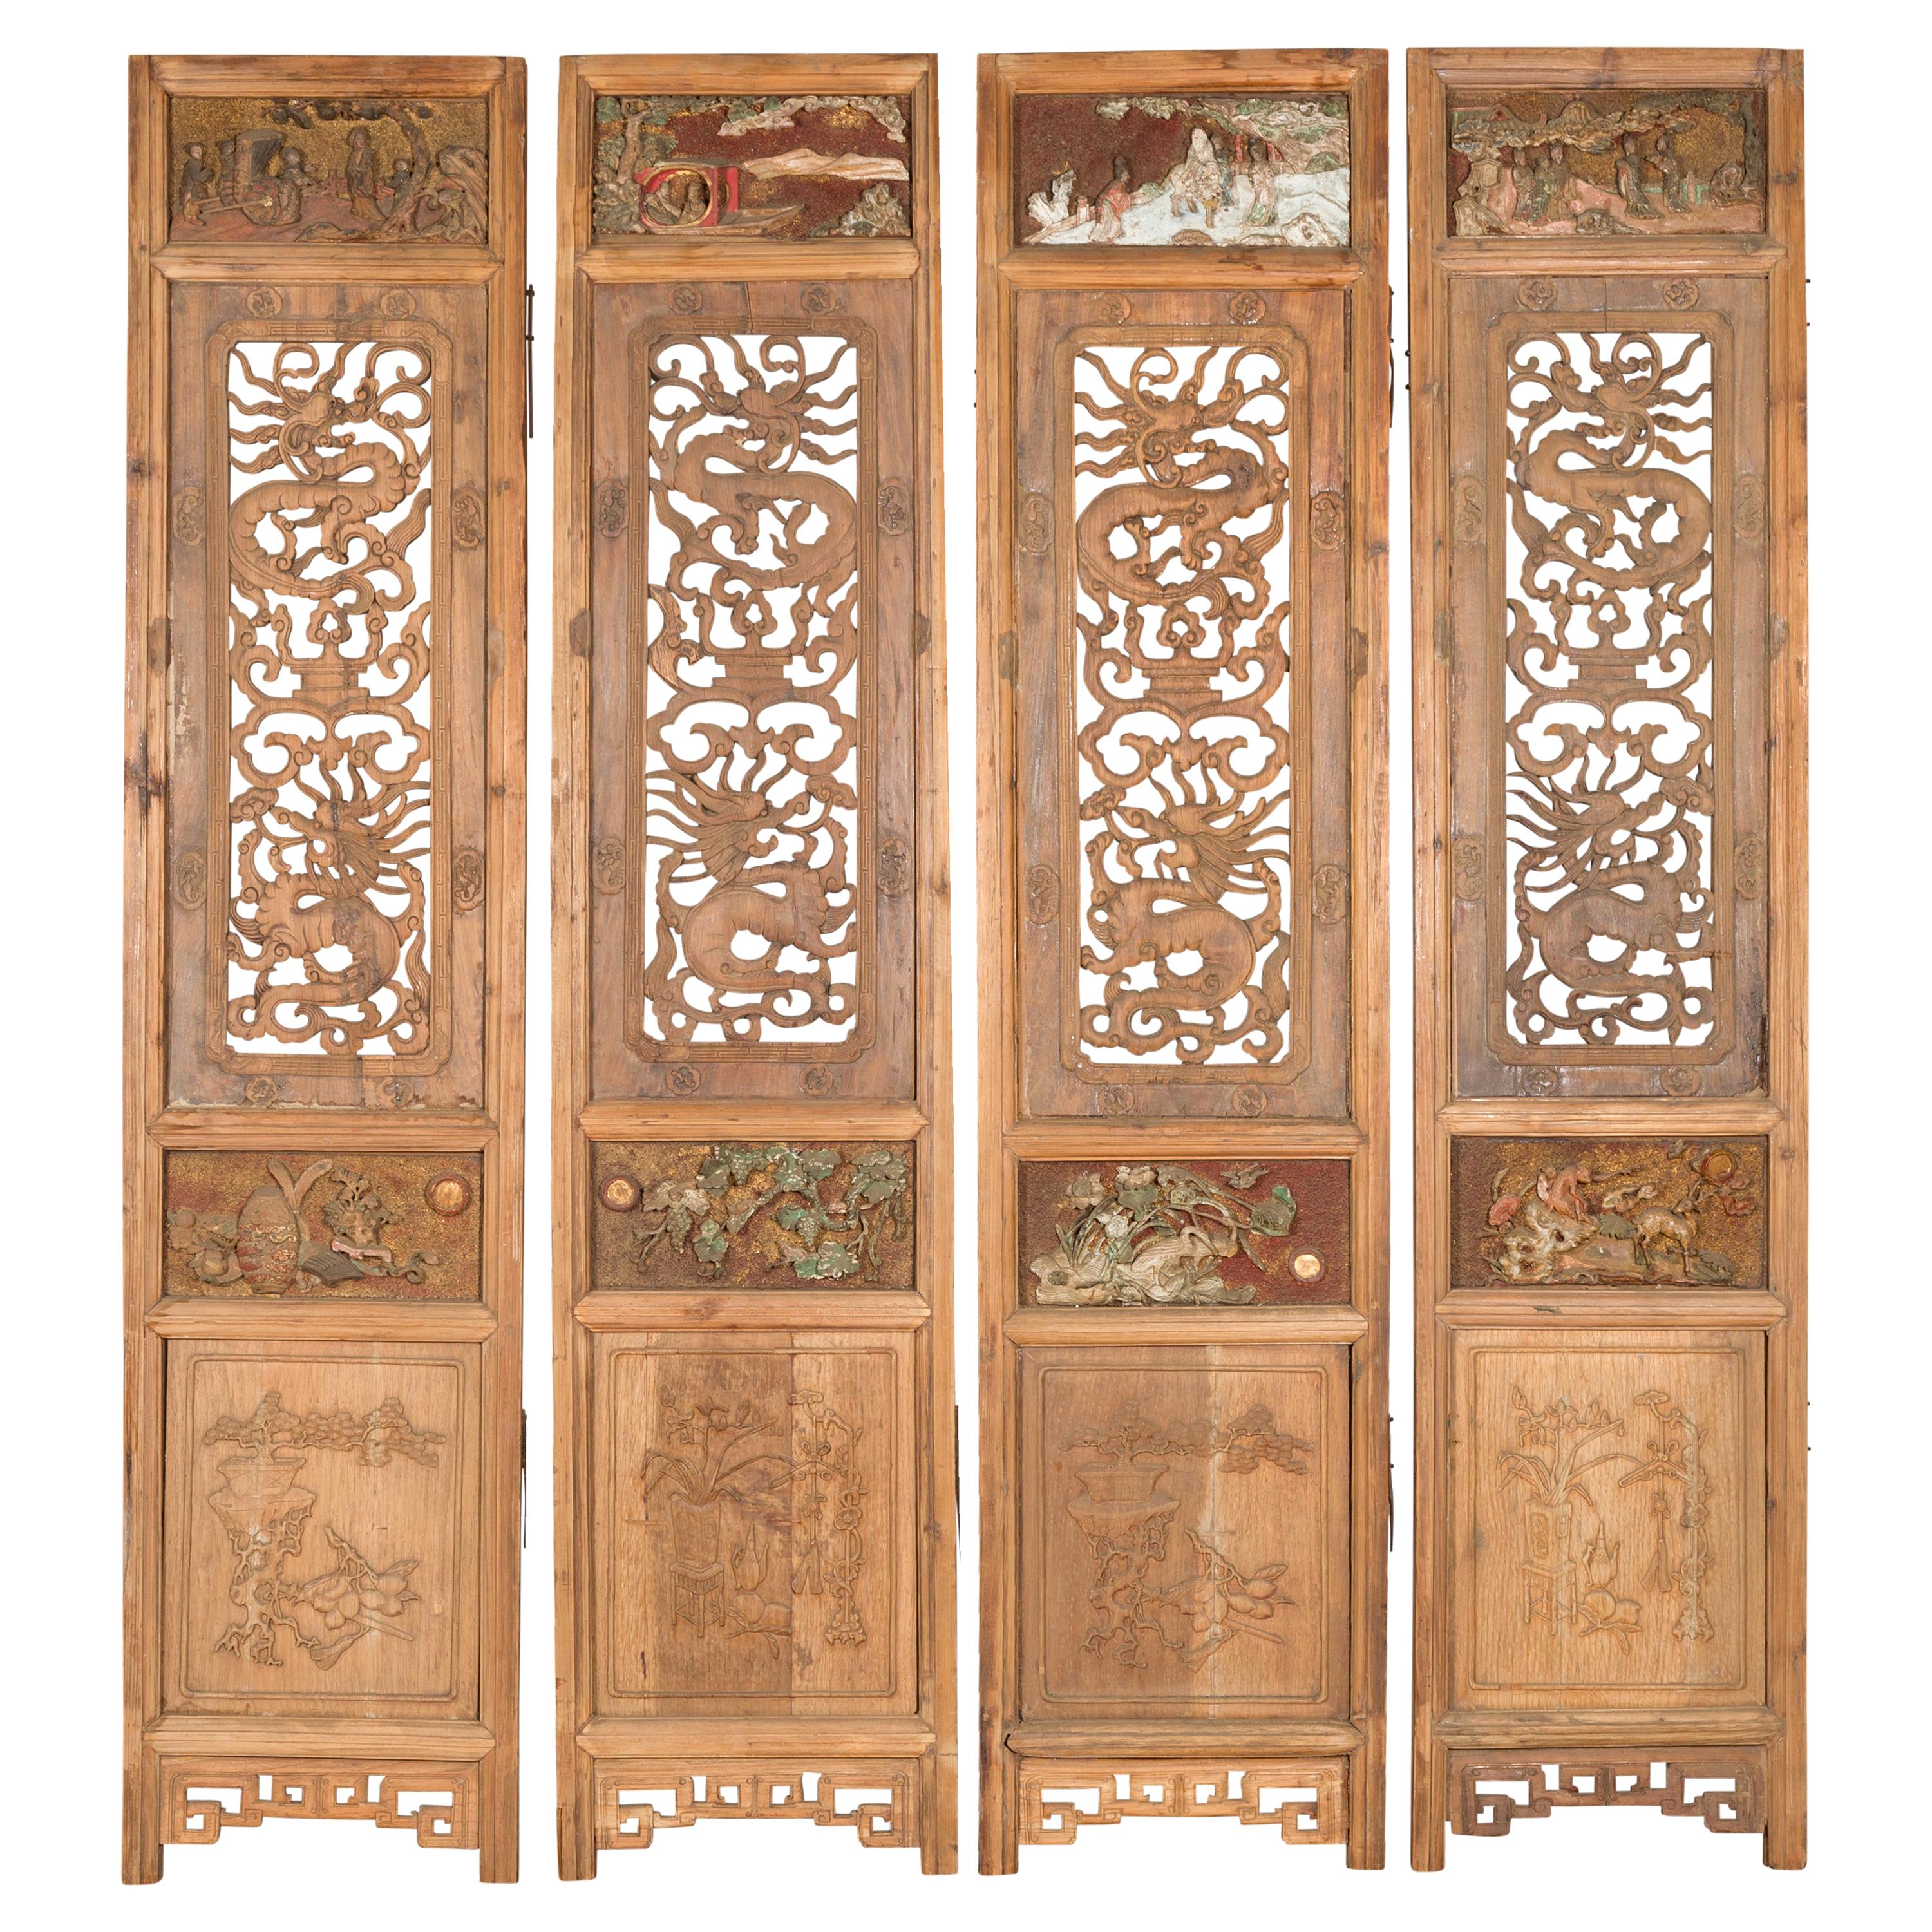 Set of Four Chinese 19th Century Qing Dynasty Carved Wooden Screens with Dragons